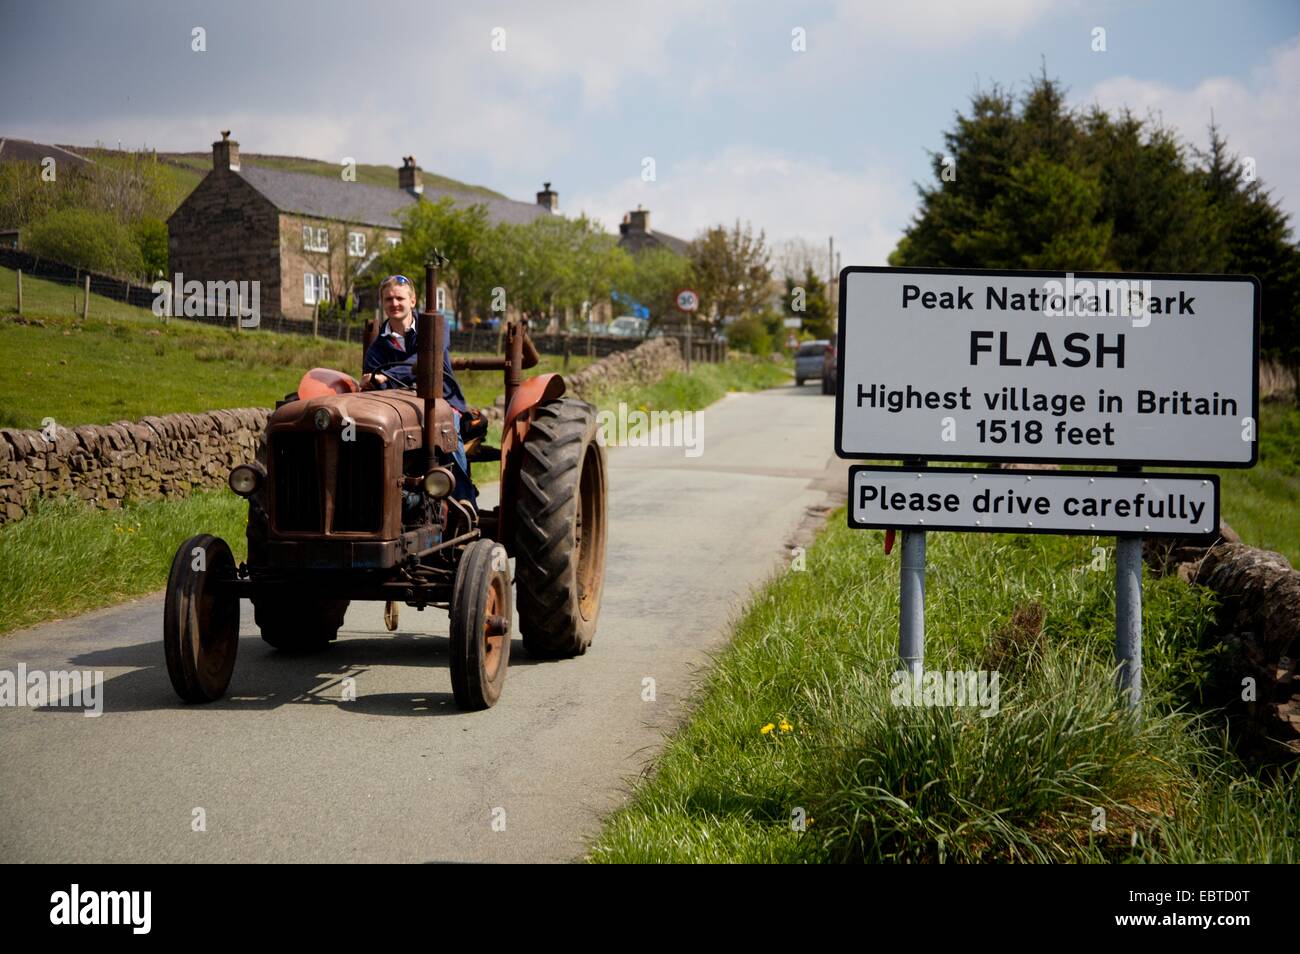 Flash, highest village in Britain with vintage tractor Stock Photo